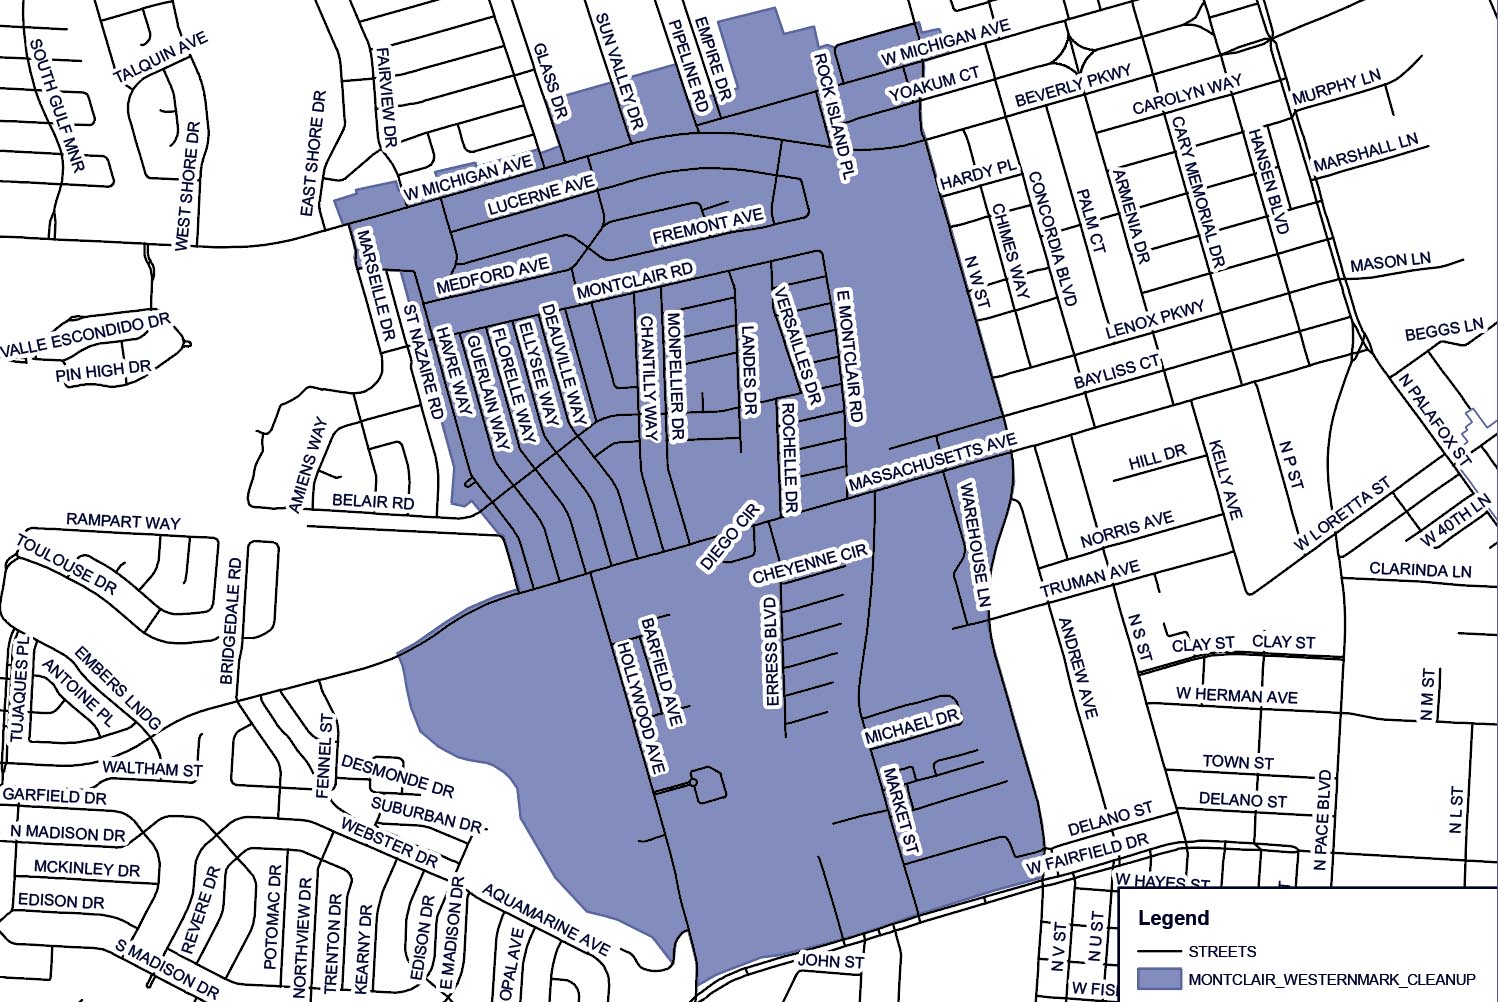 Montclair and Westernmark Neighborhood Cleanup Map